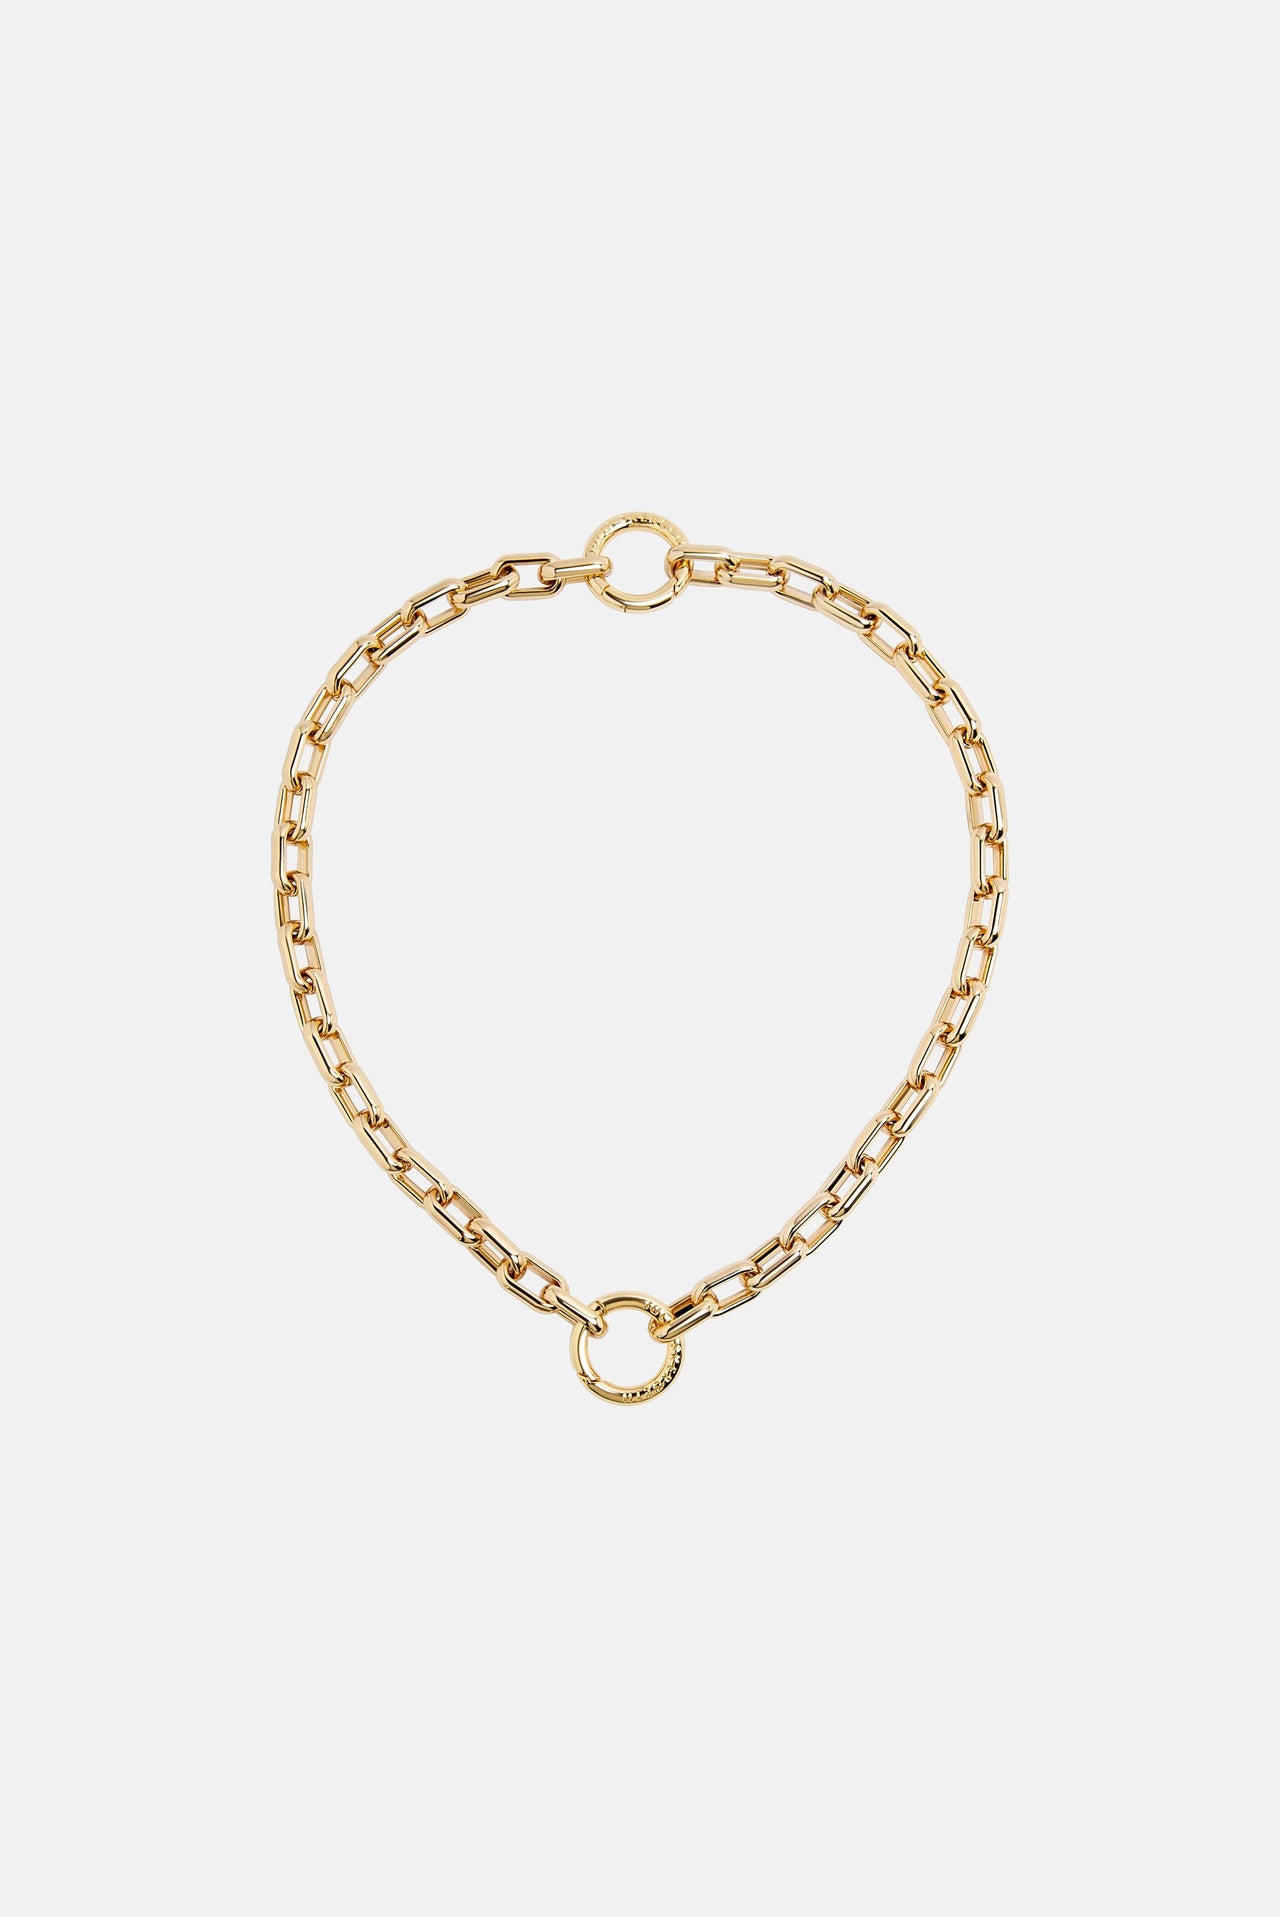 The Dual-Ring Clasp Necklace Gold - JULIA SKERGETH